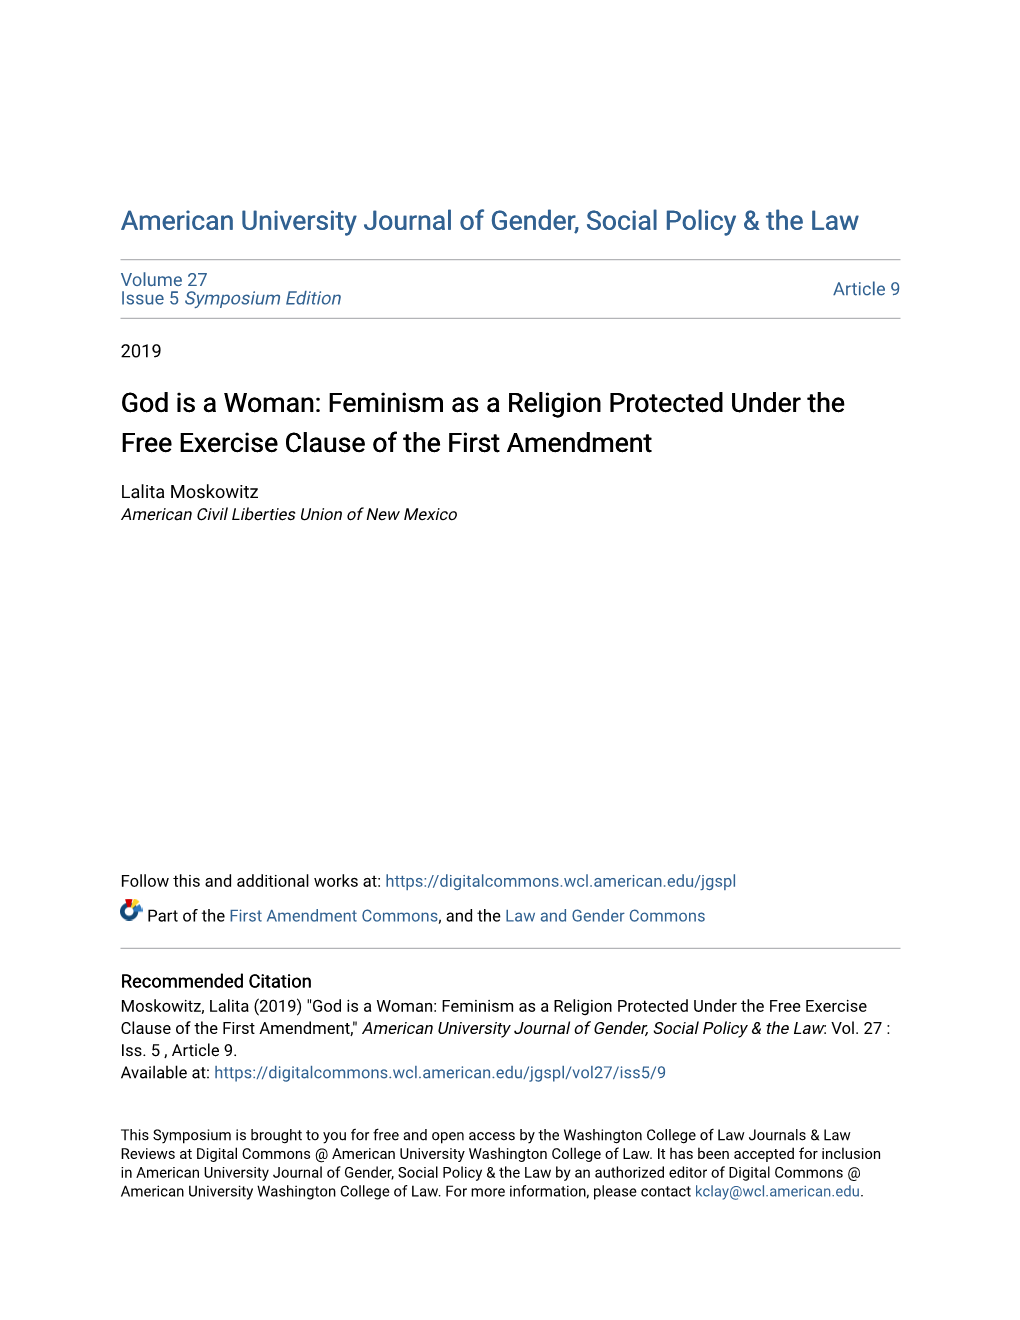 God Is a Woman: Feminism As a Religion Protected Under the Free Exercise Clause of the First Amendment